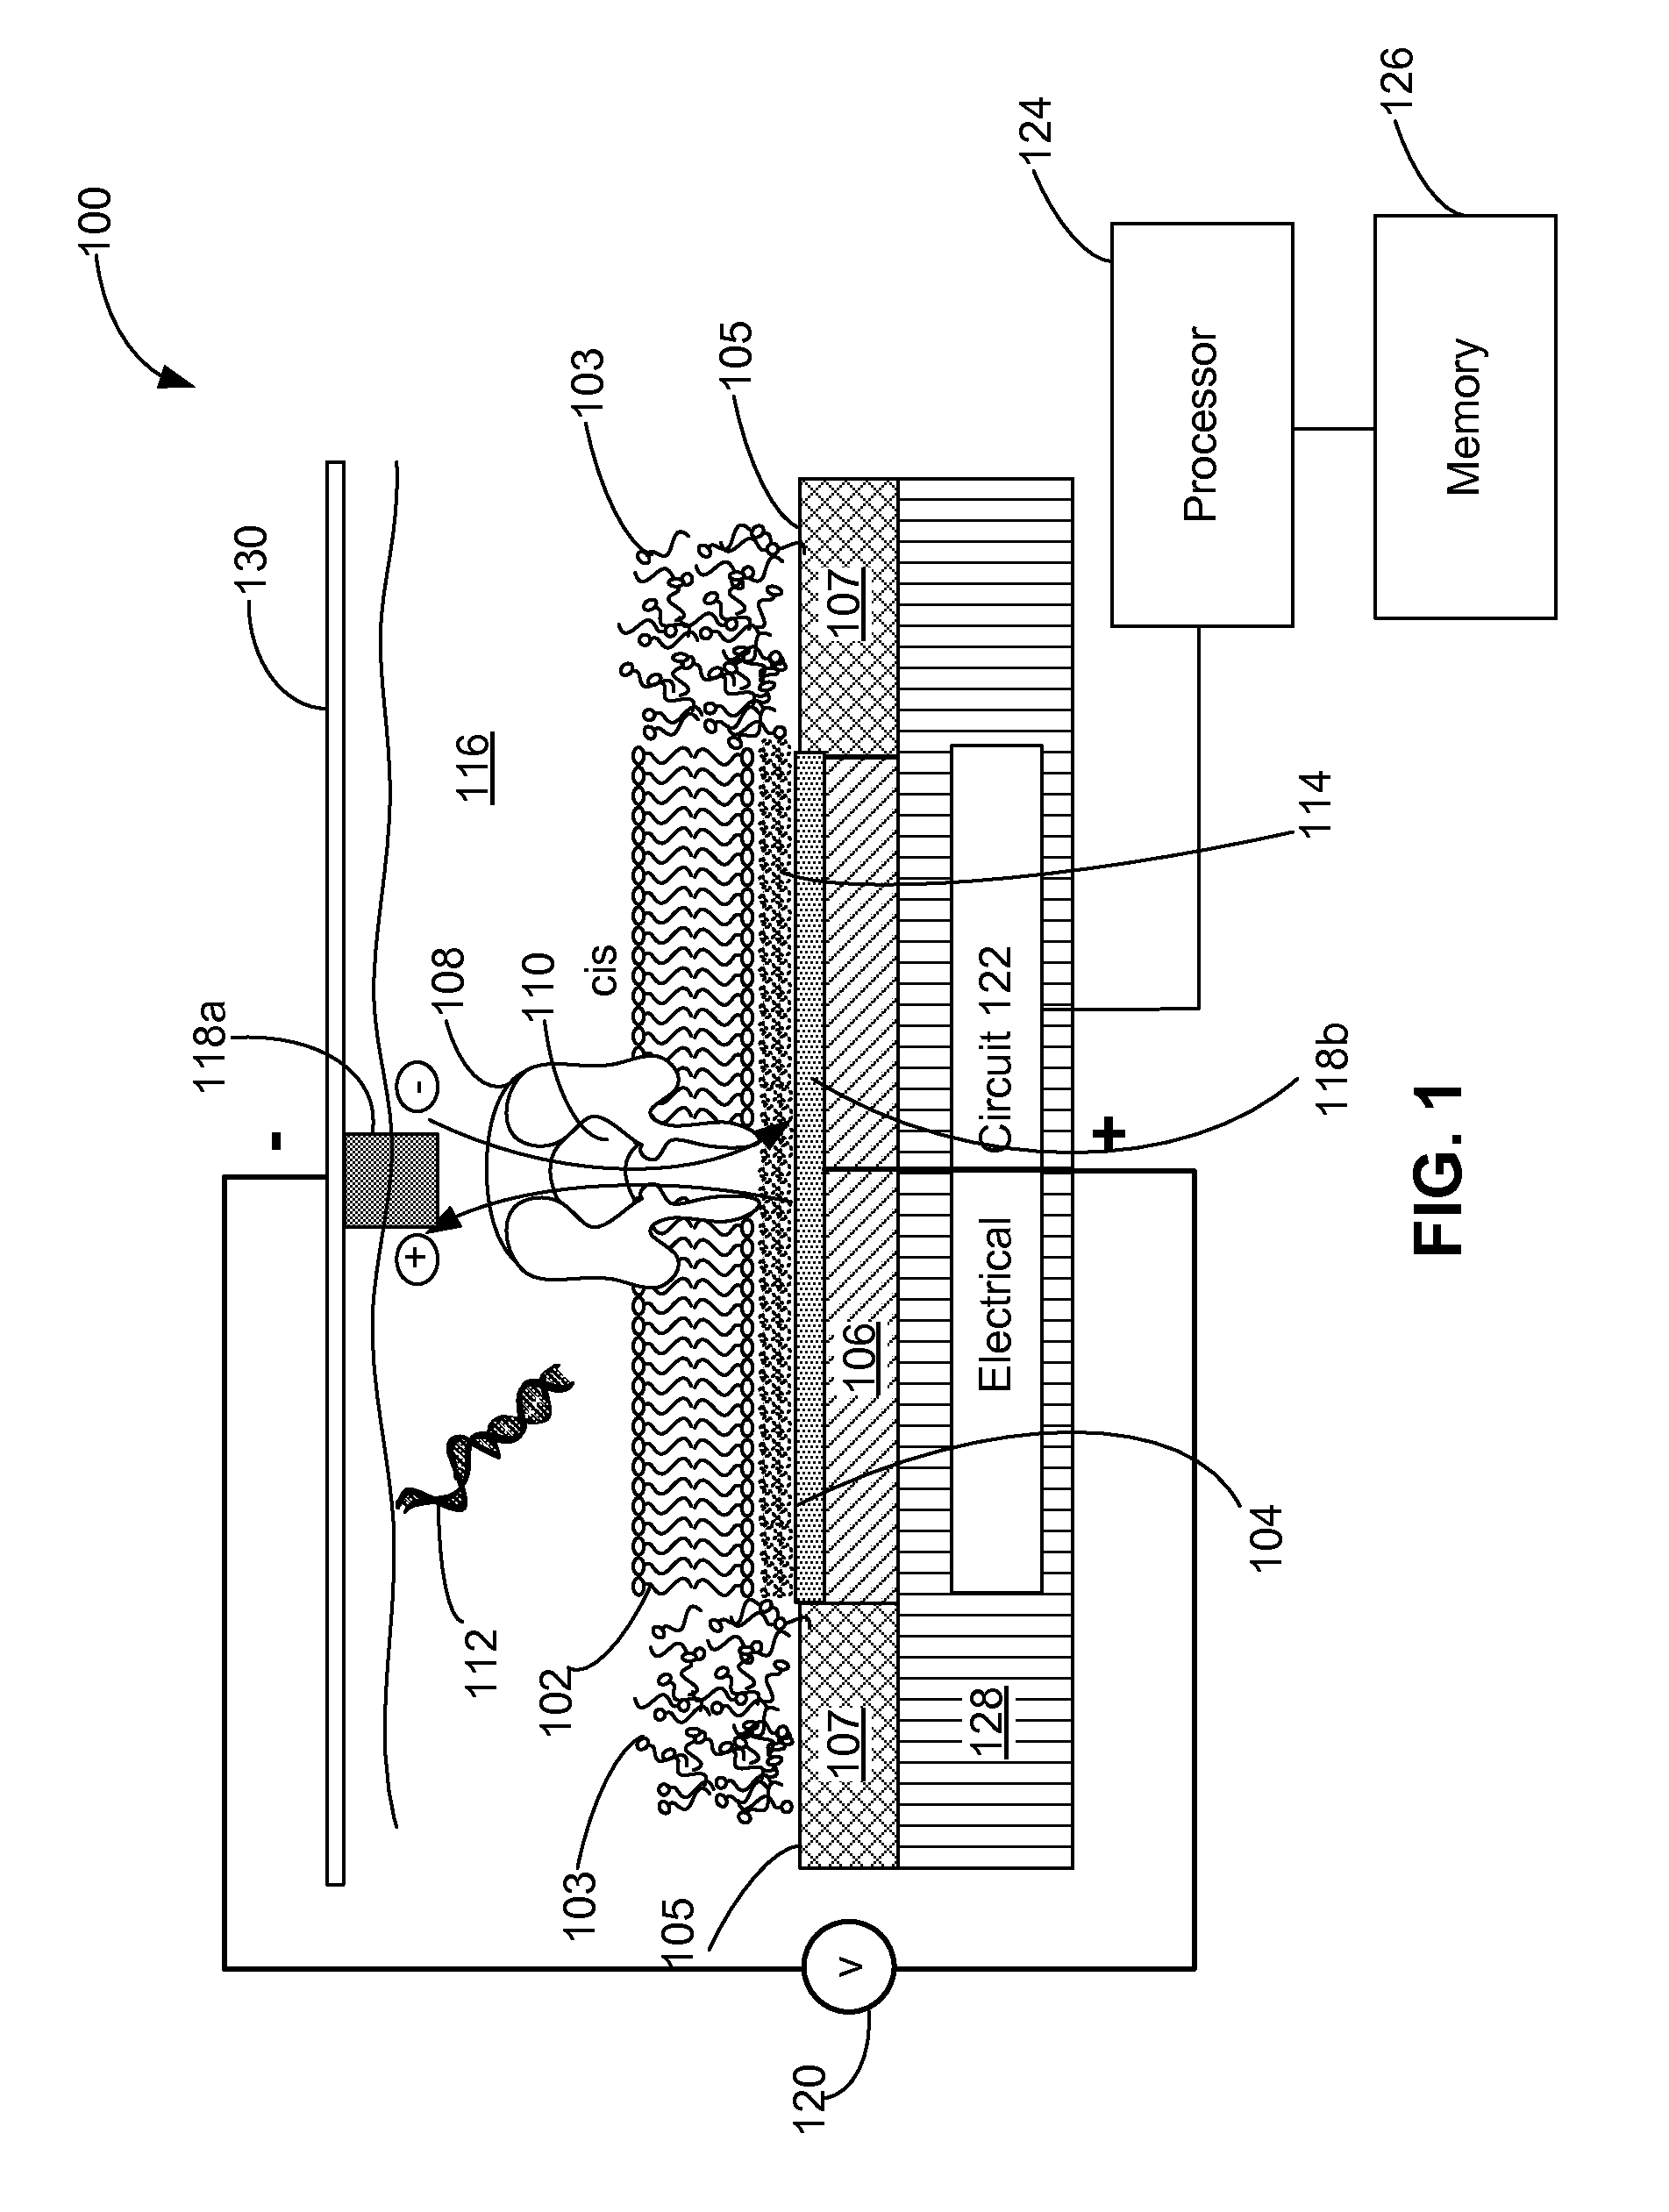 Systems and methods for characterizing a molecule